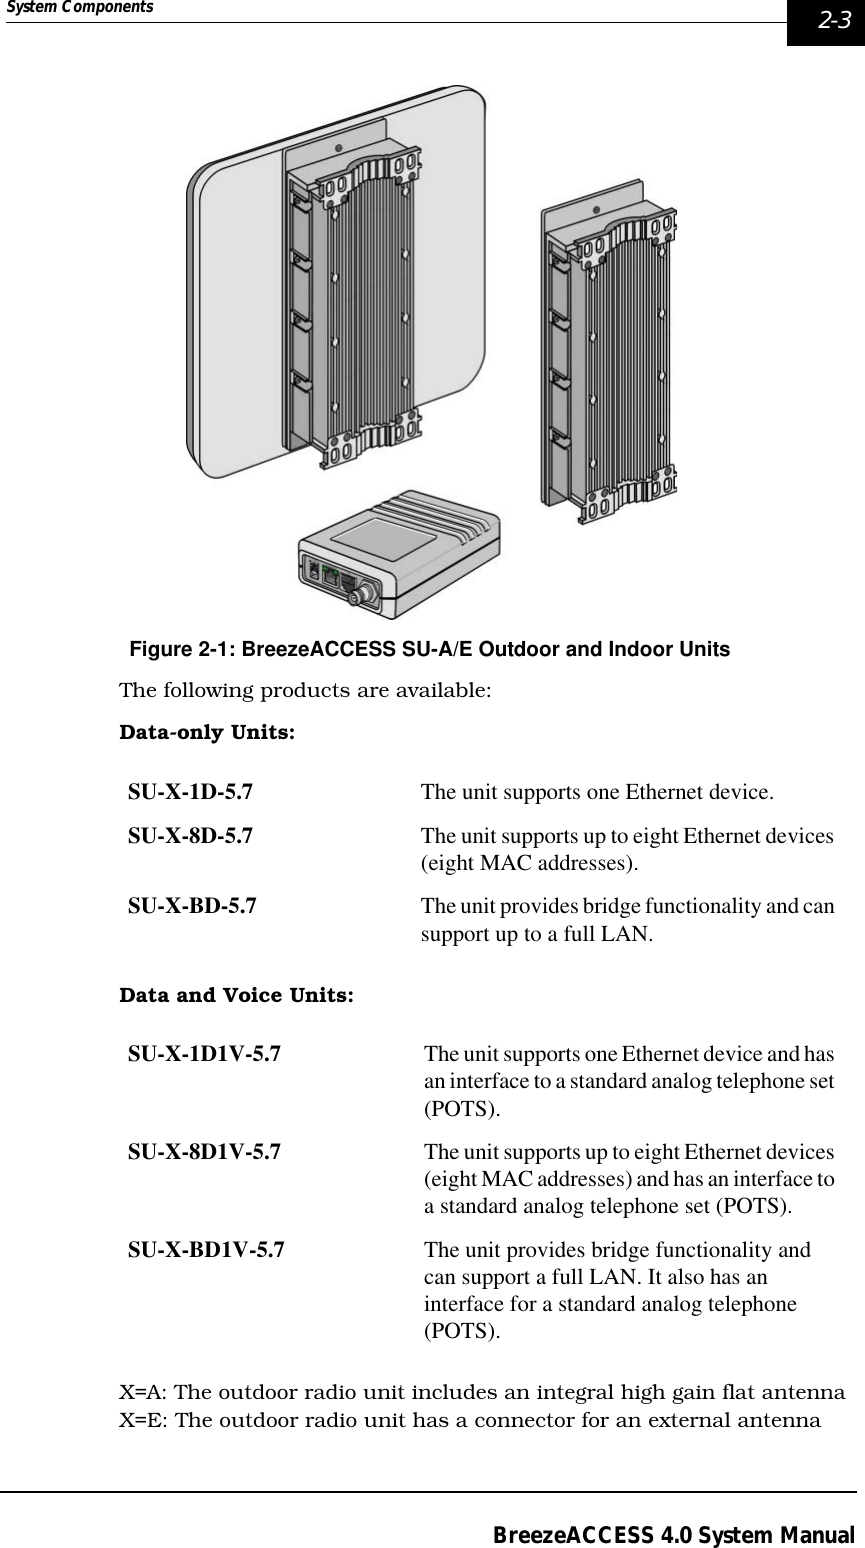 System Components  2-3BreezeACCESS 4.0 System ManualFigure 2-1: BreezeACCESS SU-A/E Outdoor and Indoor UnitsThe following products are available:Data-only Units: Data and Voice Units: X=A: The outdoor radio unit includes an integral high gain flat antennaX=E: The outdoor radio unit has a connector for an external antennaSU-X-1D-5.7 The unit supports one Ethernet device.SU-X-8D-5.7 The unit supports up to eight Ethernet devices (eight MAC addresses). SU-X-BD-5.7 The unit provides bridge functionality and can support up to a full LAN.SU-X-1D1V-5.7 The unit supports one Ethernet device and has an interface to a standard analog telephone set (POTS).SU-X-8D1V-5.7 The unit supports up to eight Ethernet devices (eight MAC addresses) and has an interface to a standard analog telephone set (POTS).SU-X-BD1V-5.7 The unit provides bridge functionality and can support a full LAN. It also has an interface for a standard analog telephone (POTS).